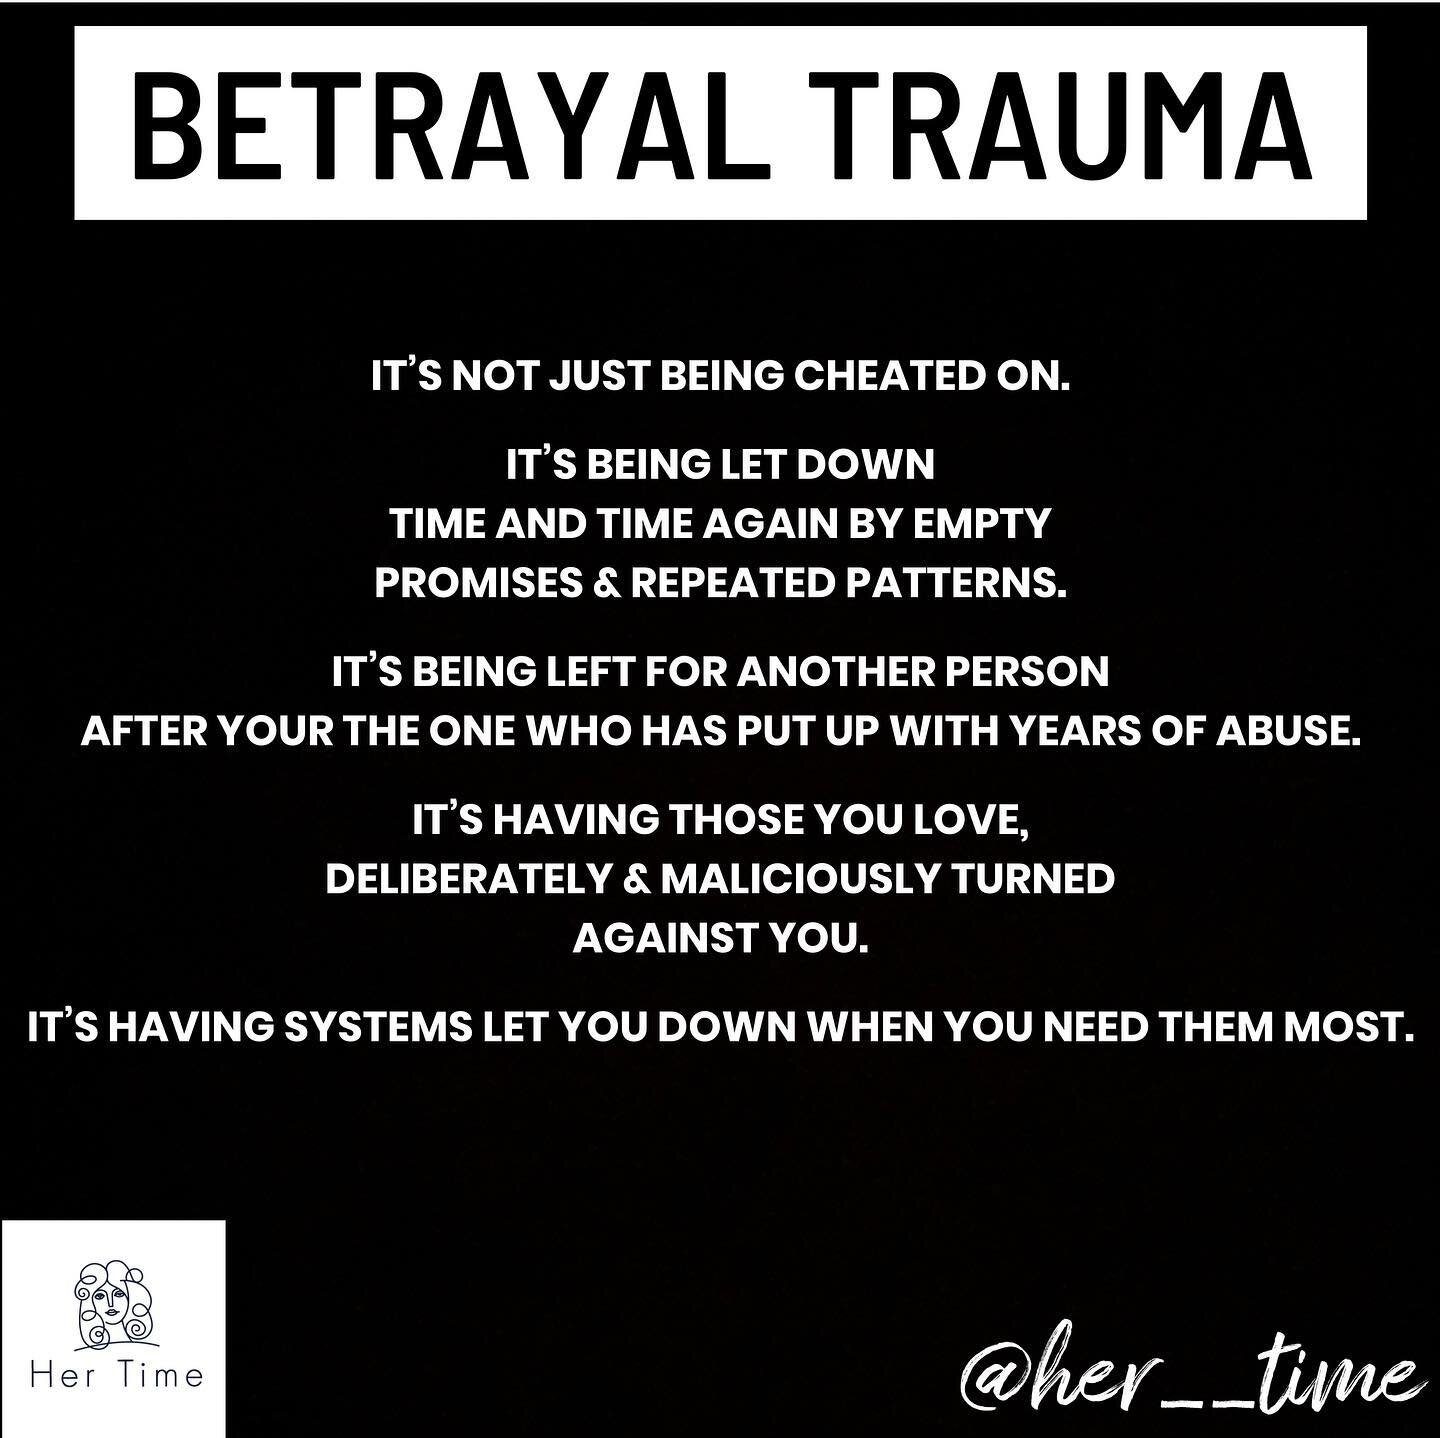 Feeling betrayed is completely despairing and gut wrenching. 

And betrayal trauma, like all traumas, results in all kinds of emotional, physical, psychological and financial distresses and behaviours. 

Particularly if one is left isolated and  alon